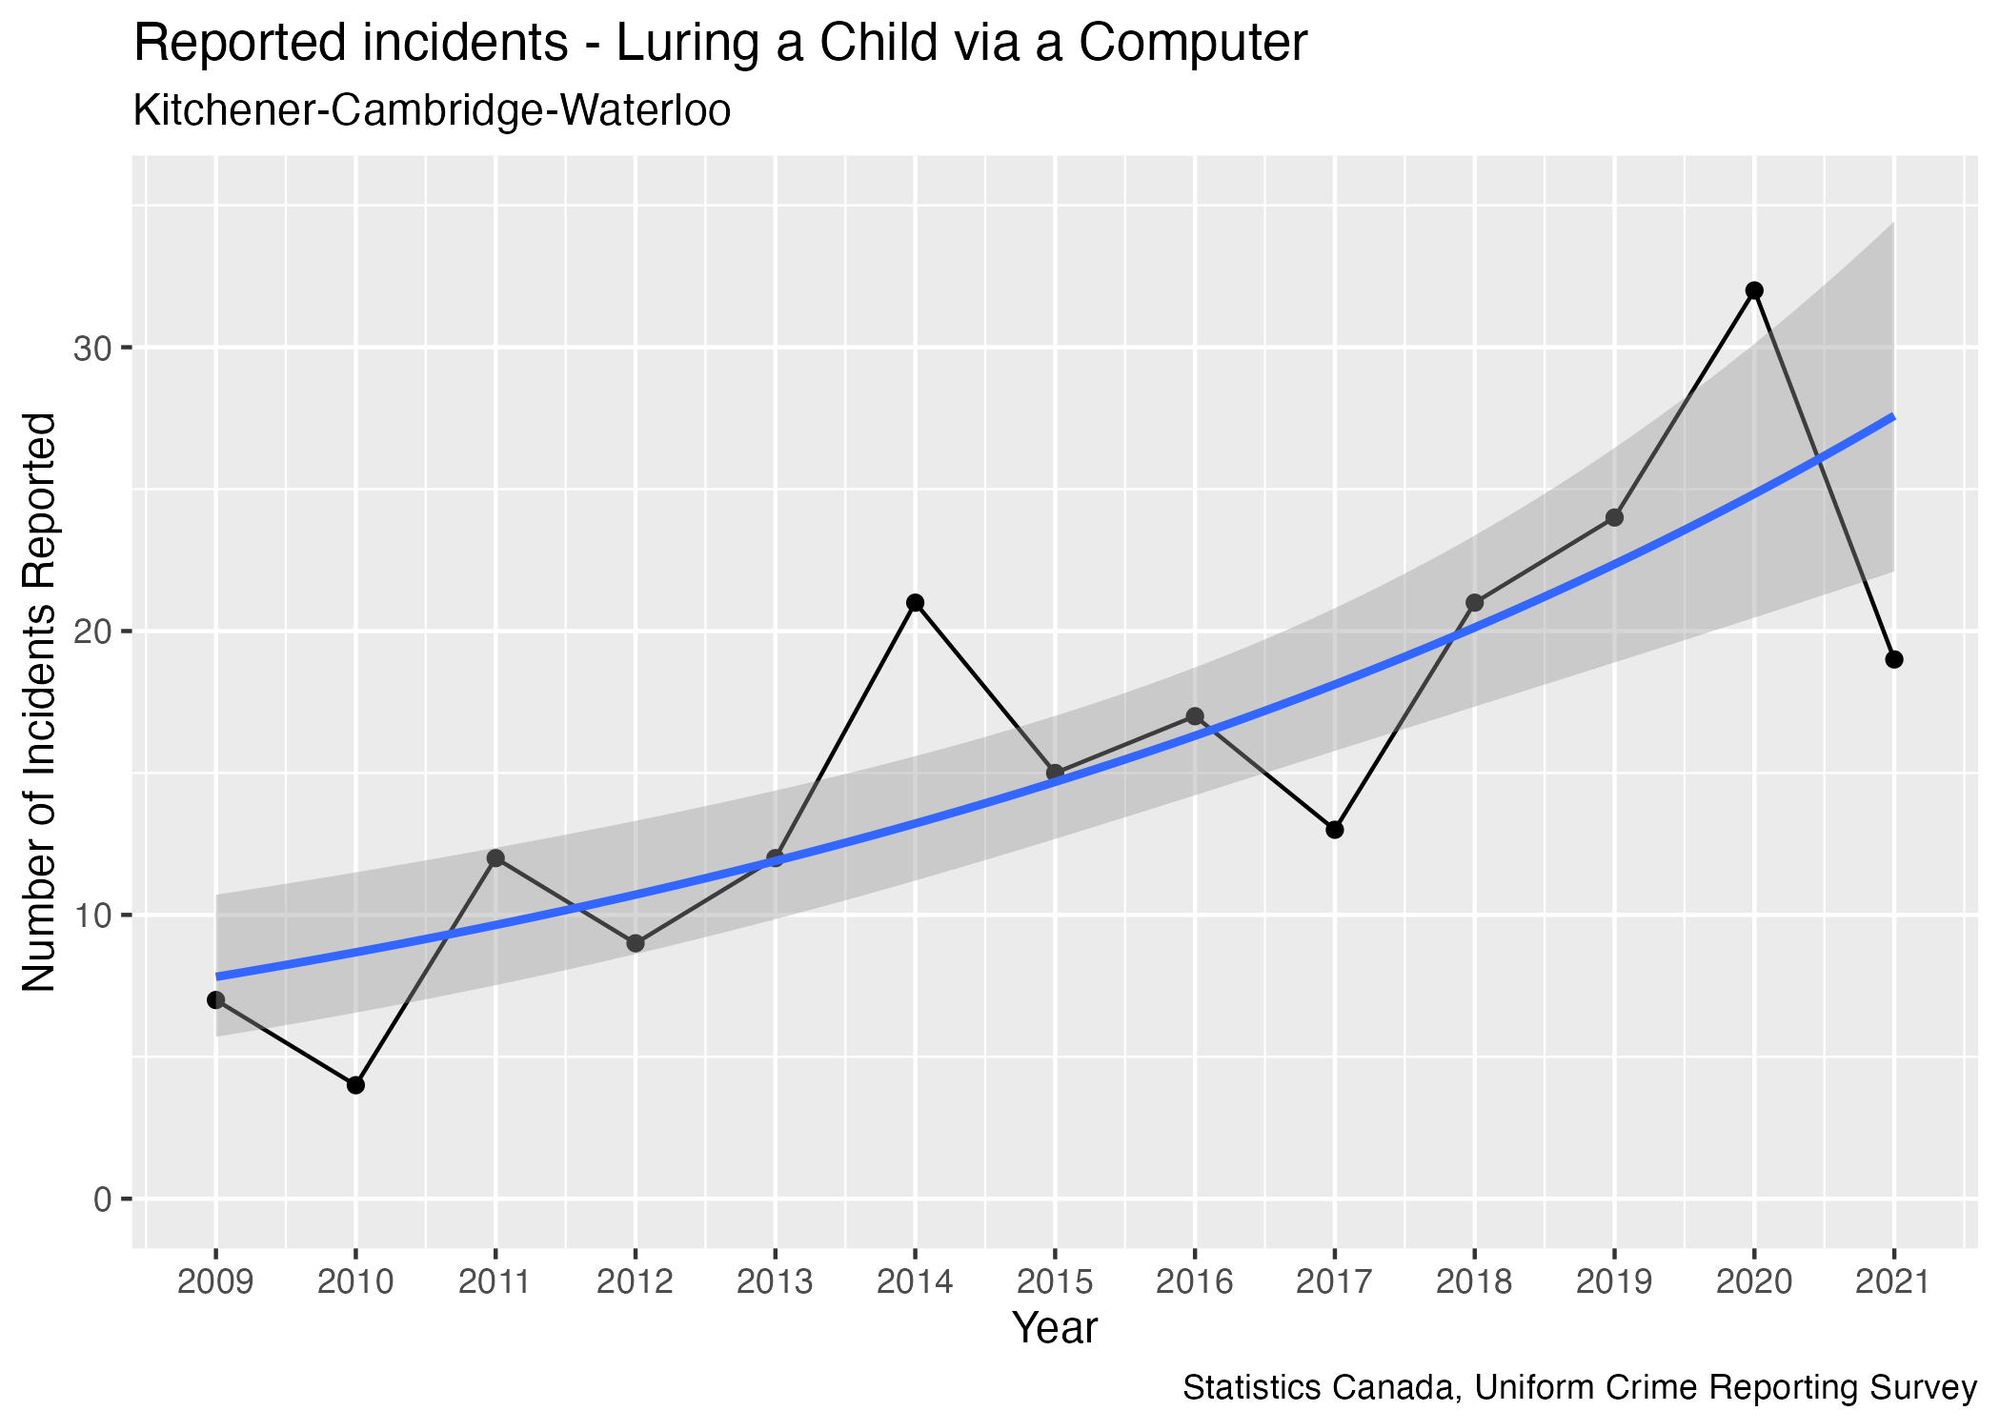 A graph of "Reported incidents - Luring a Child via a Computer" for Kitchener-Cambridge-Waterloo between 2009 and 2021. While the number of incidents within a given year tends to frequently switch between going up and down between consecutive years, a blue trend line indicates that overall the statistic has been increasing over this time period.